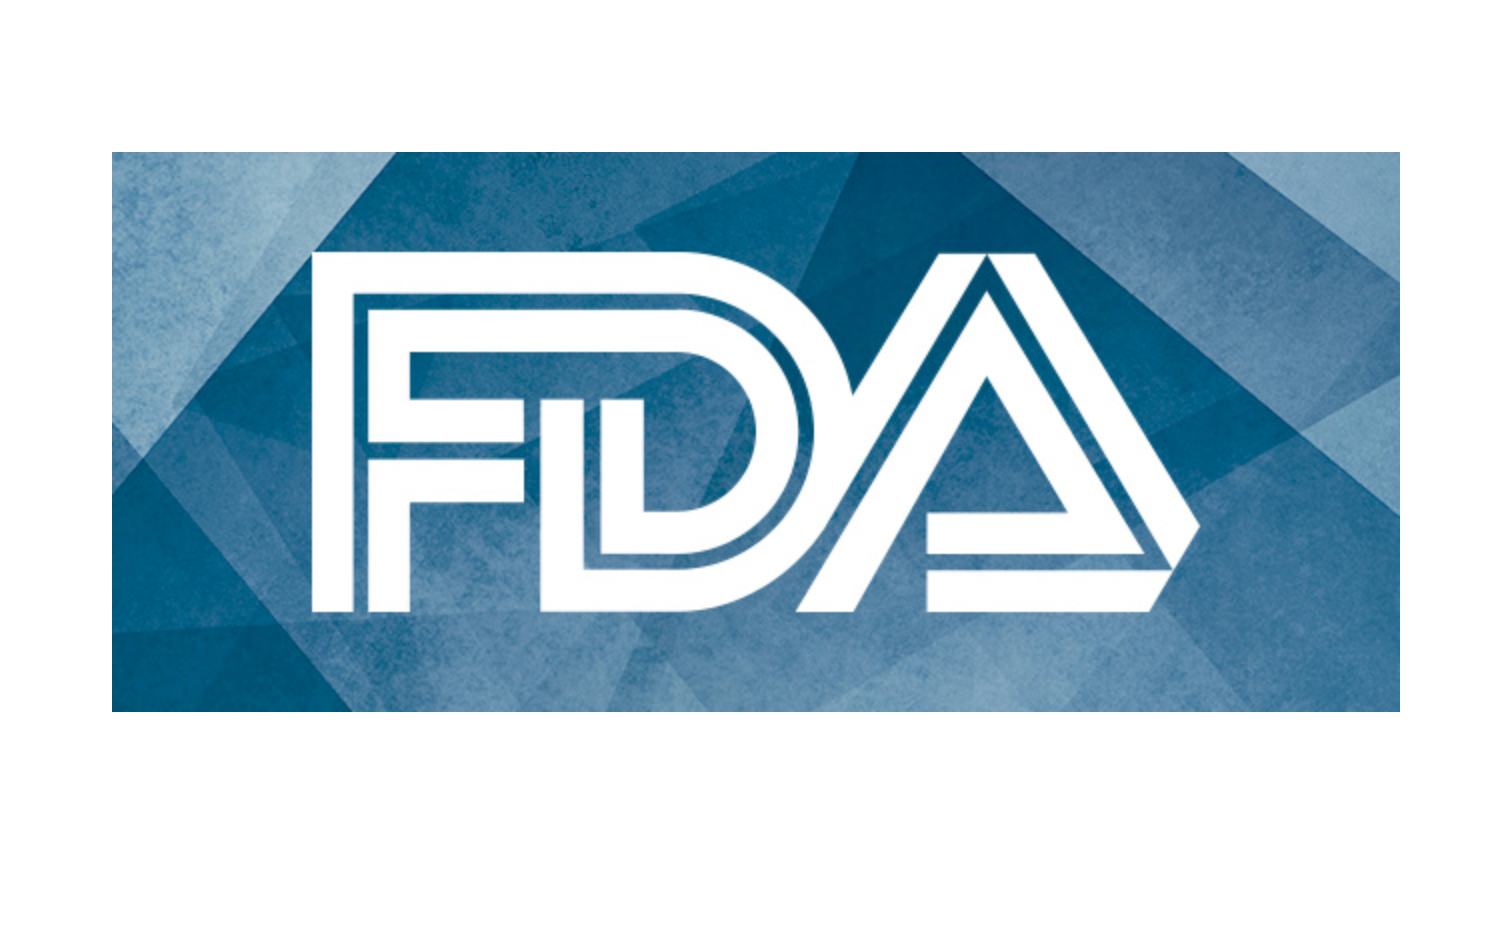 Bosutinib Approved by FDA for Pediatric Patients With Chronic Myelogenous Leukemia